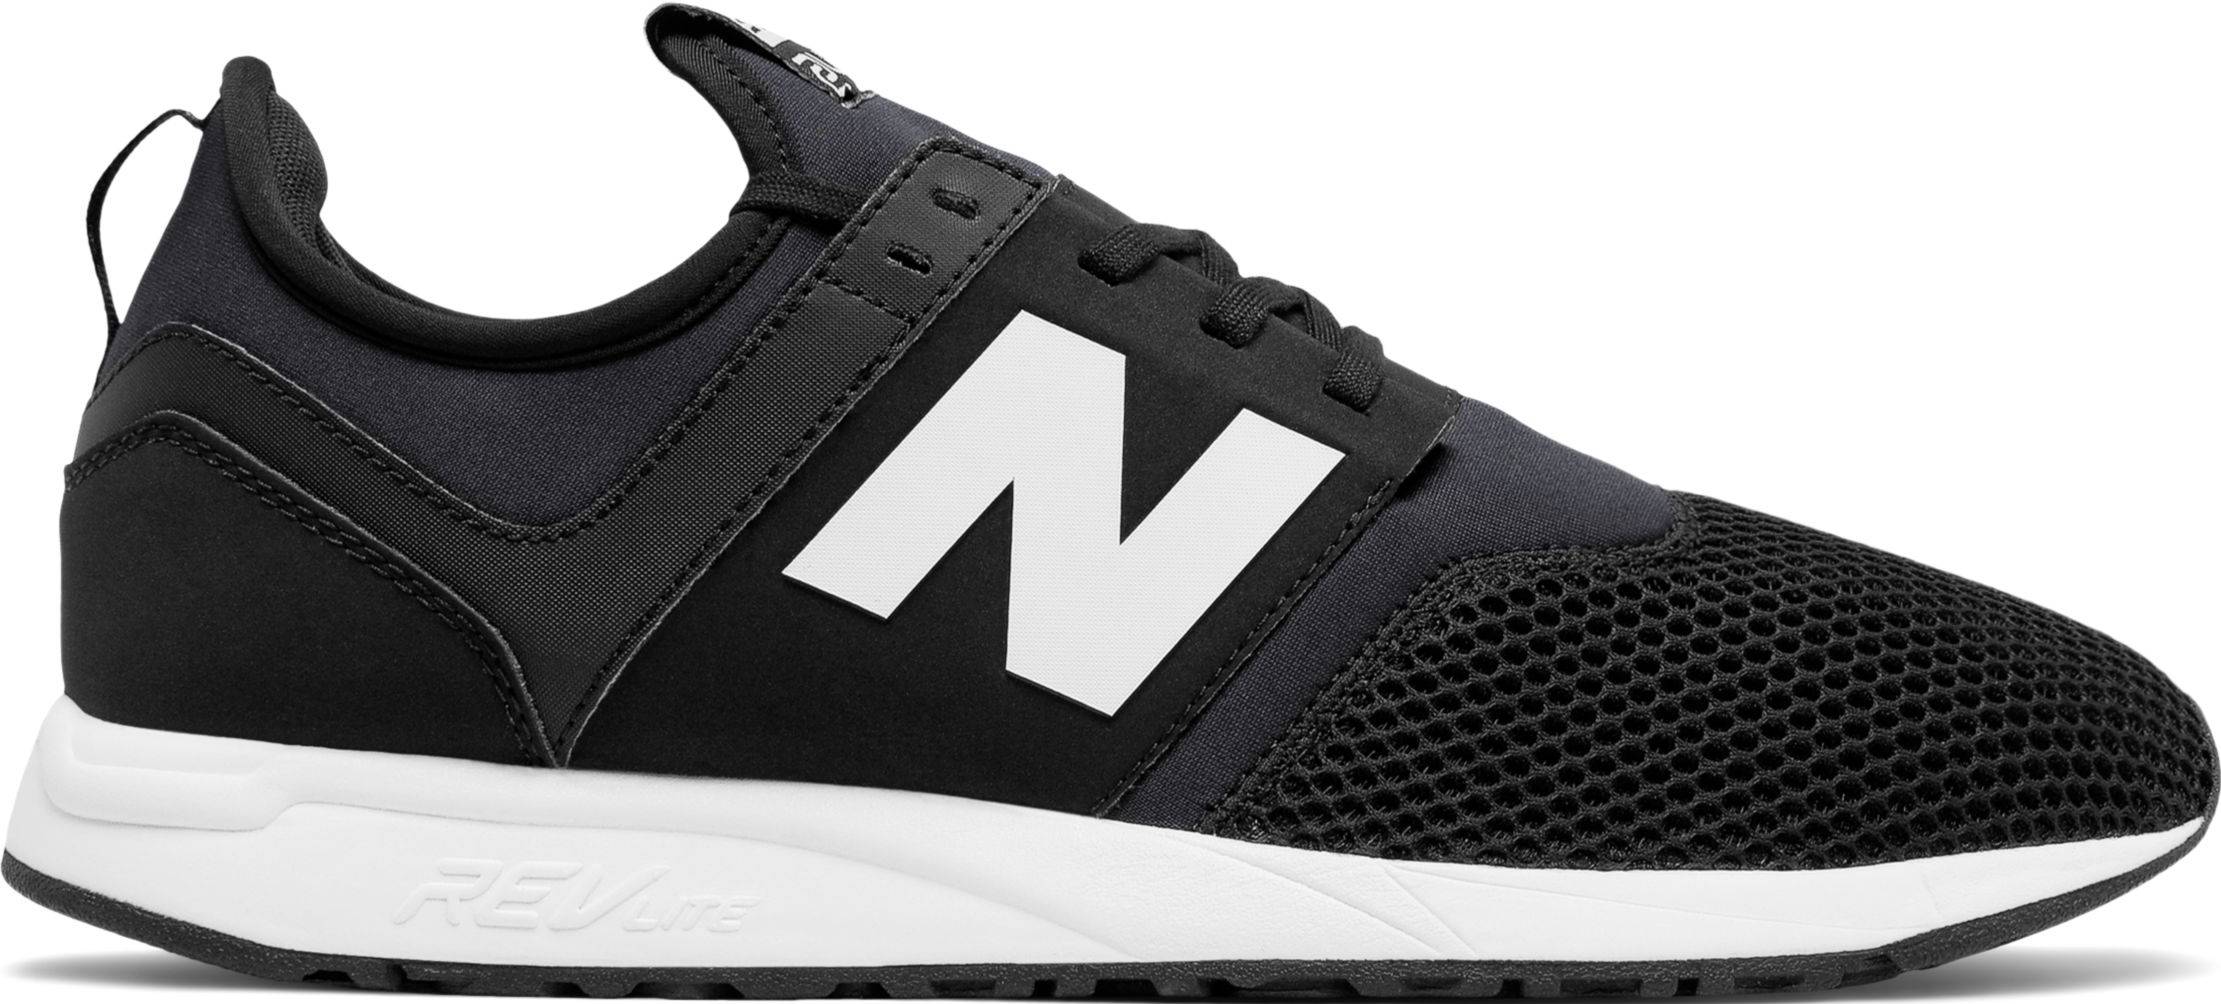 New Balance 247 Classic sneakers in blue black (only $60 ...